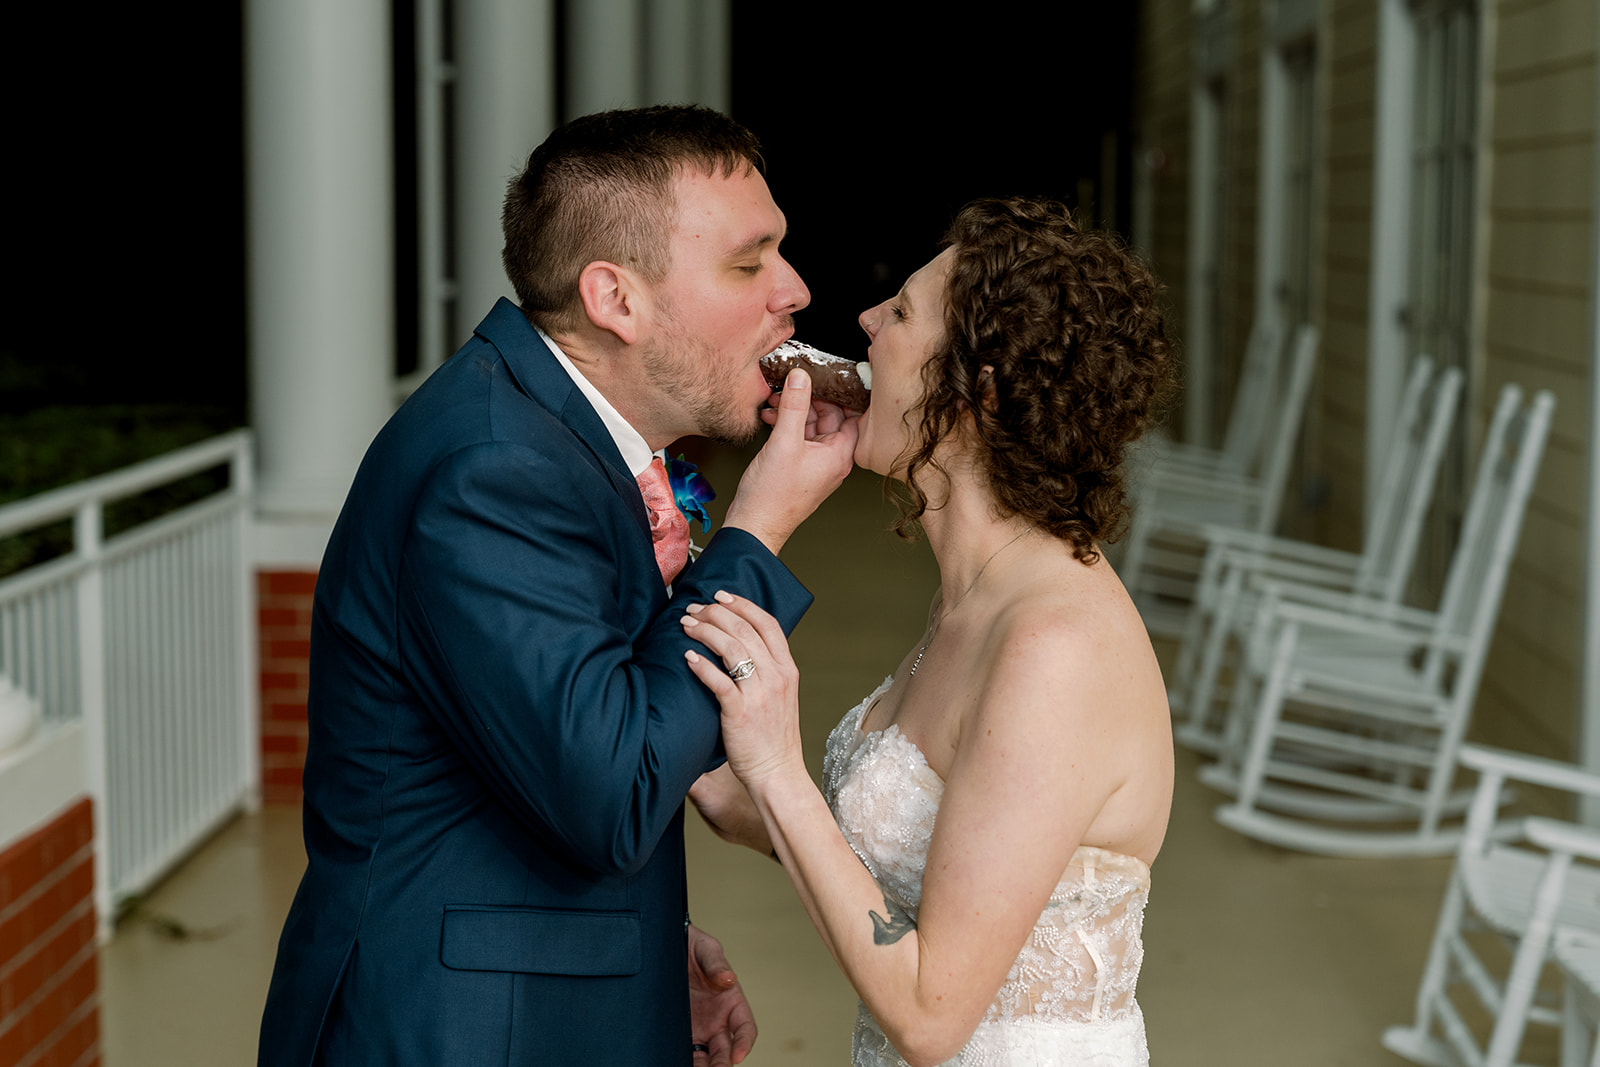 Private Cannoli eating and sharing instead of cake cutting at wedding